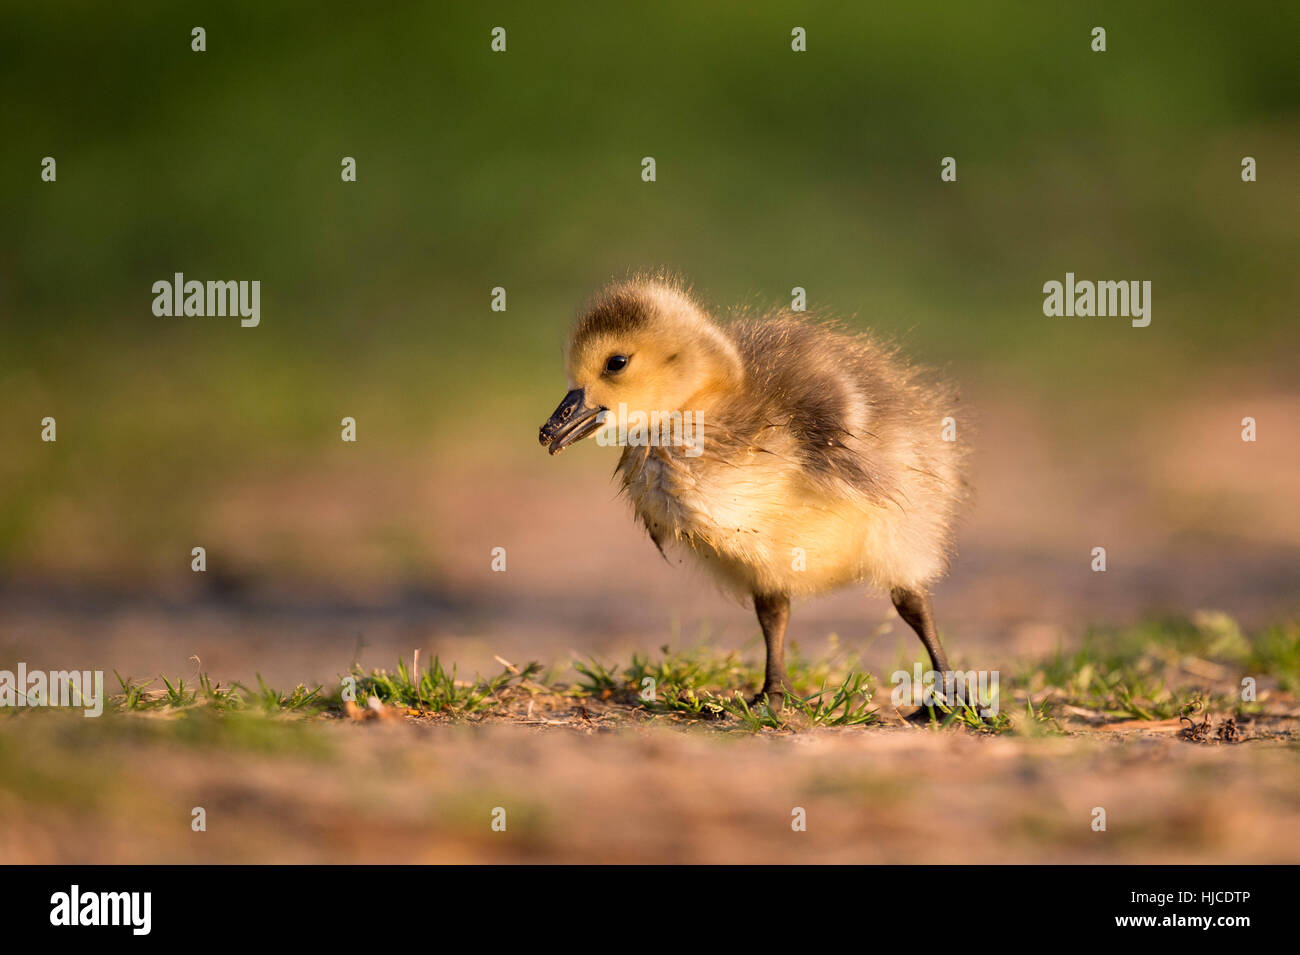 A Canada Goose gosling searches for food as the early sun lights up its small fuzzy body. Stock Photo